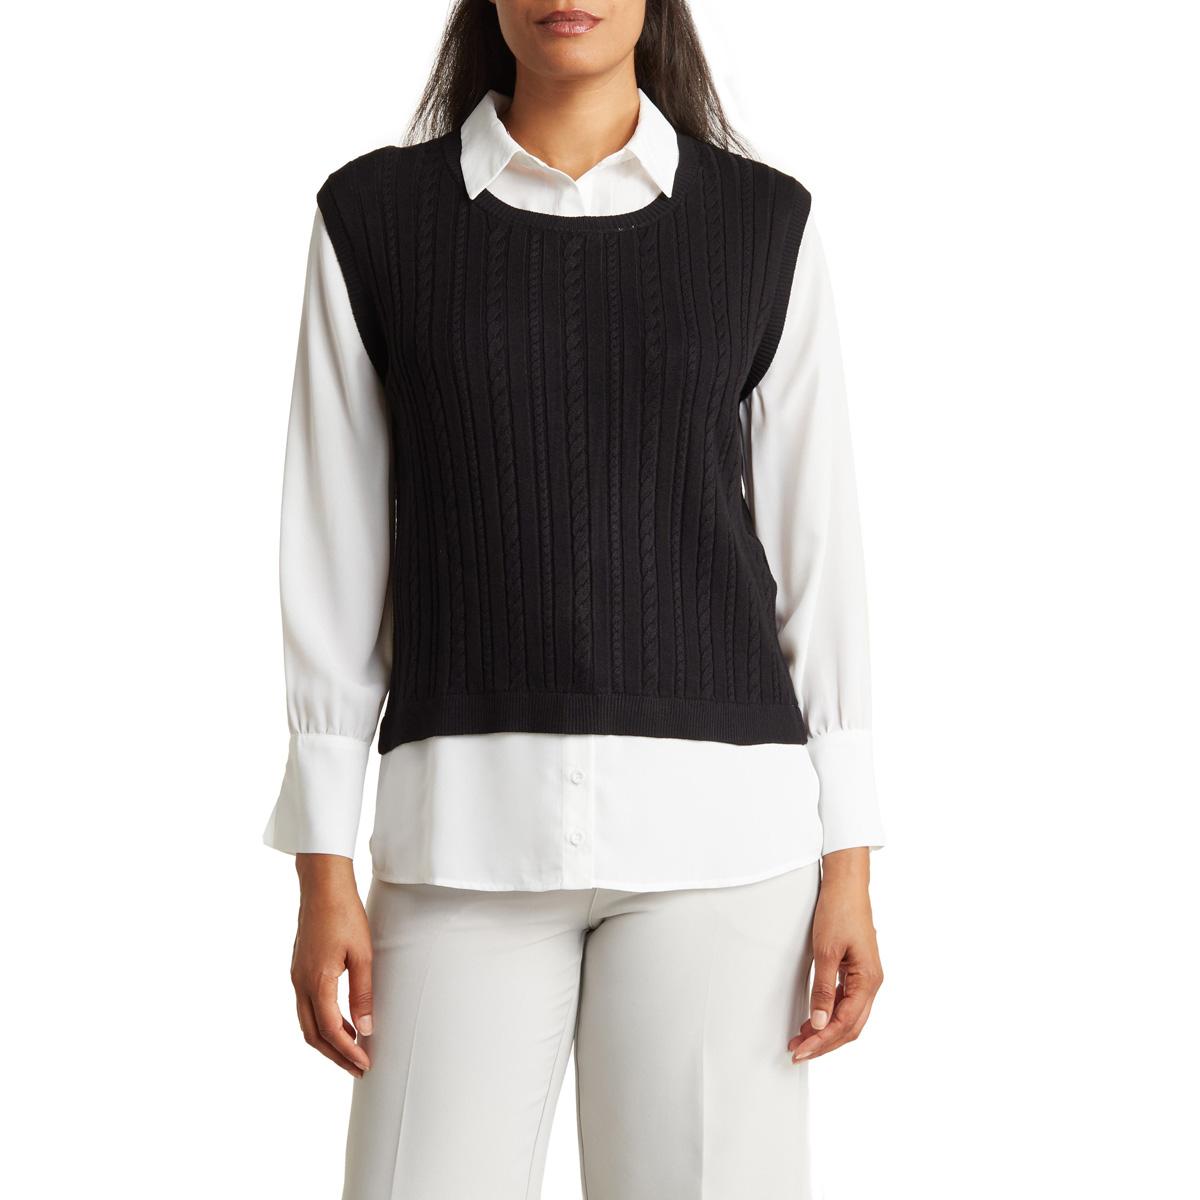 Nordstrom Rack Sweater Clearance Sale with Extra 25% Off